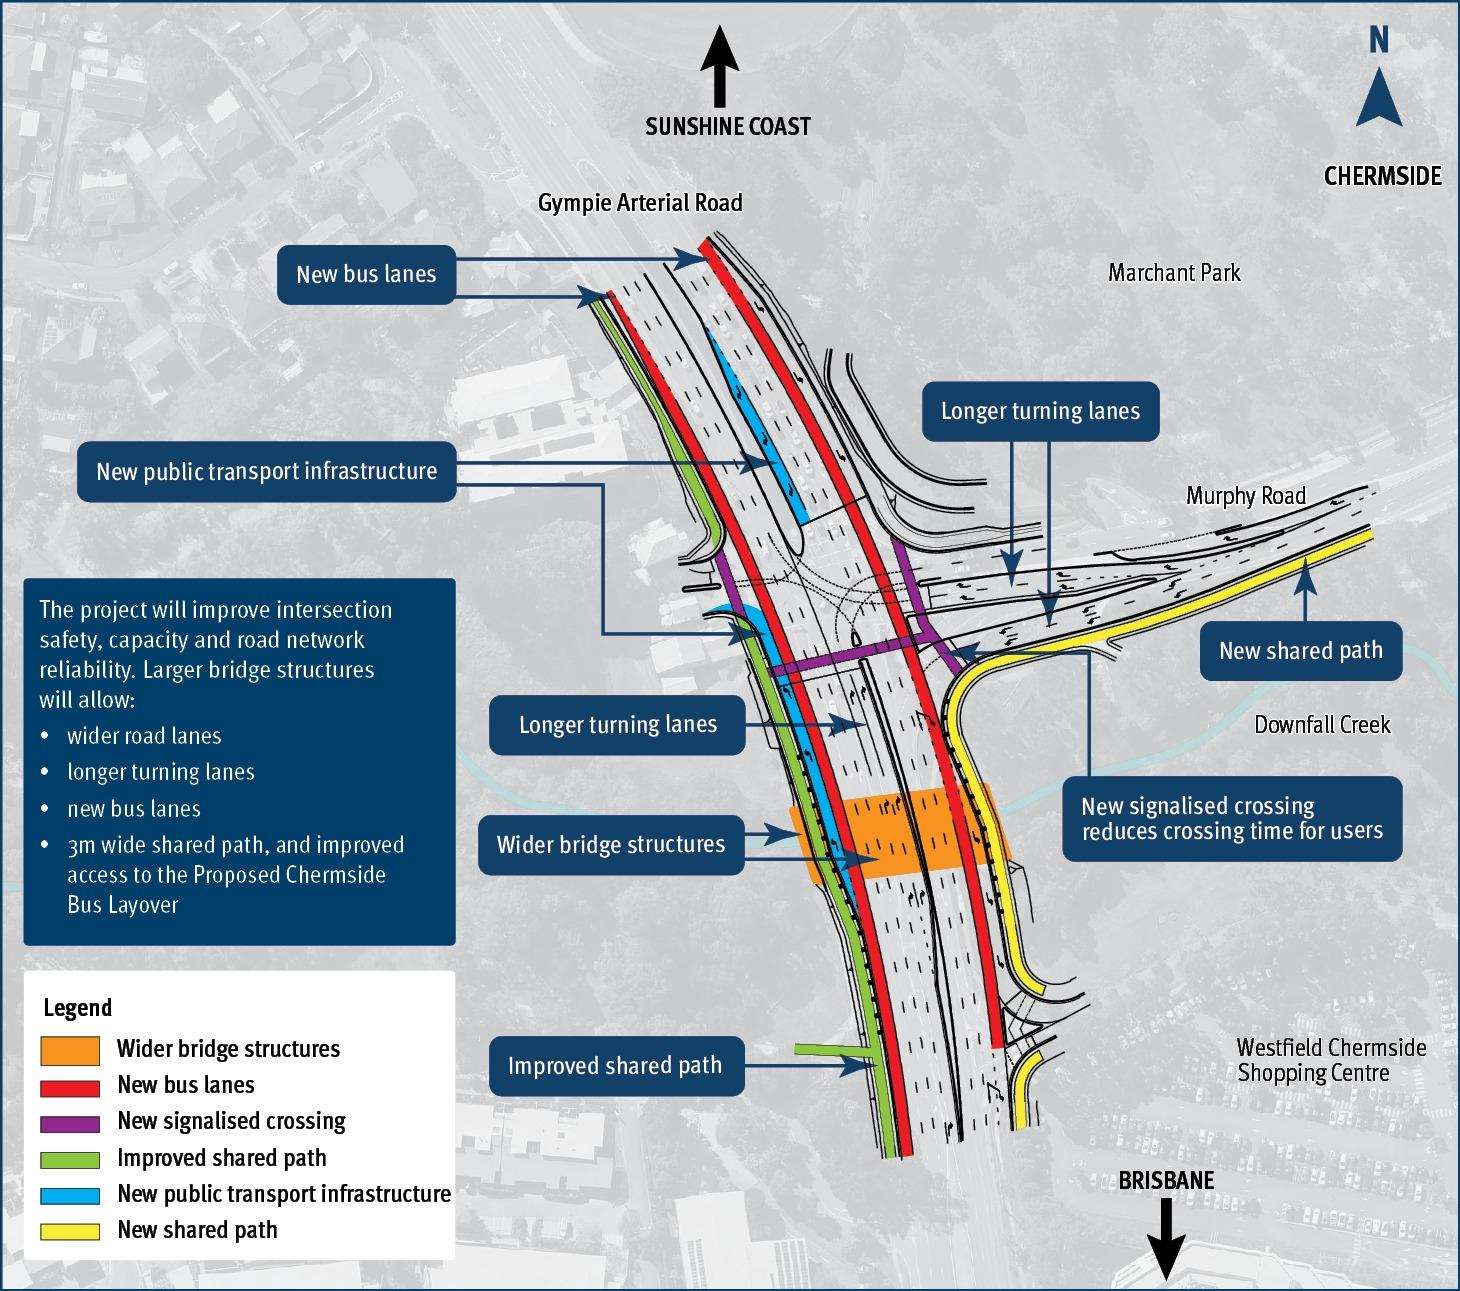 TMR's plan for Murphy Road and Downfall Creek, showing 'Wider bridge structures', but no plan to connect the Downfall Creek Bikeway.